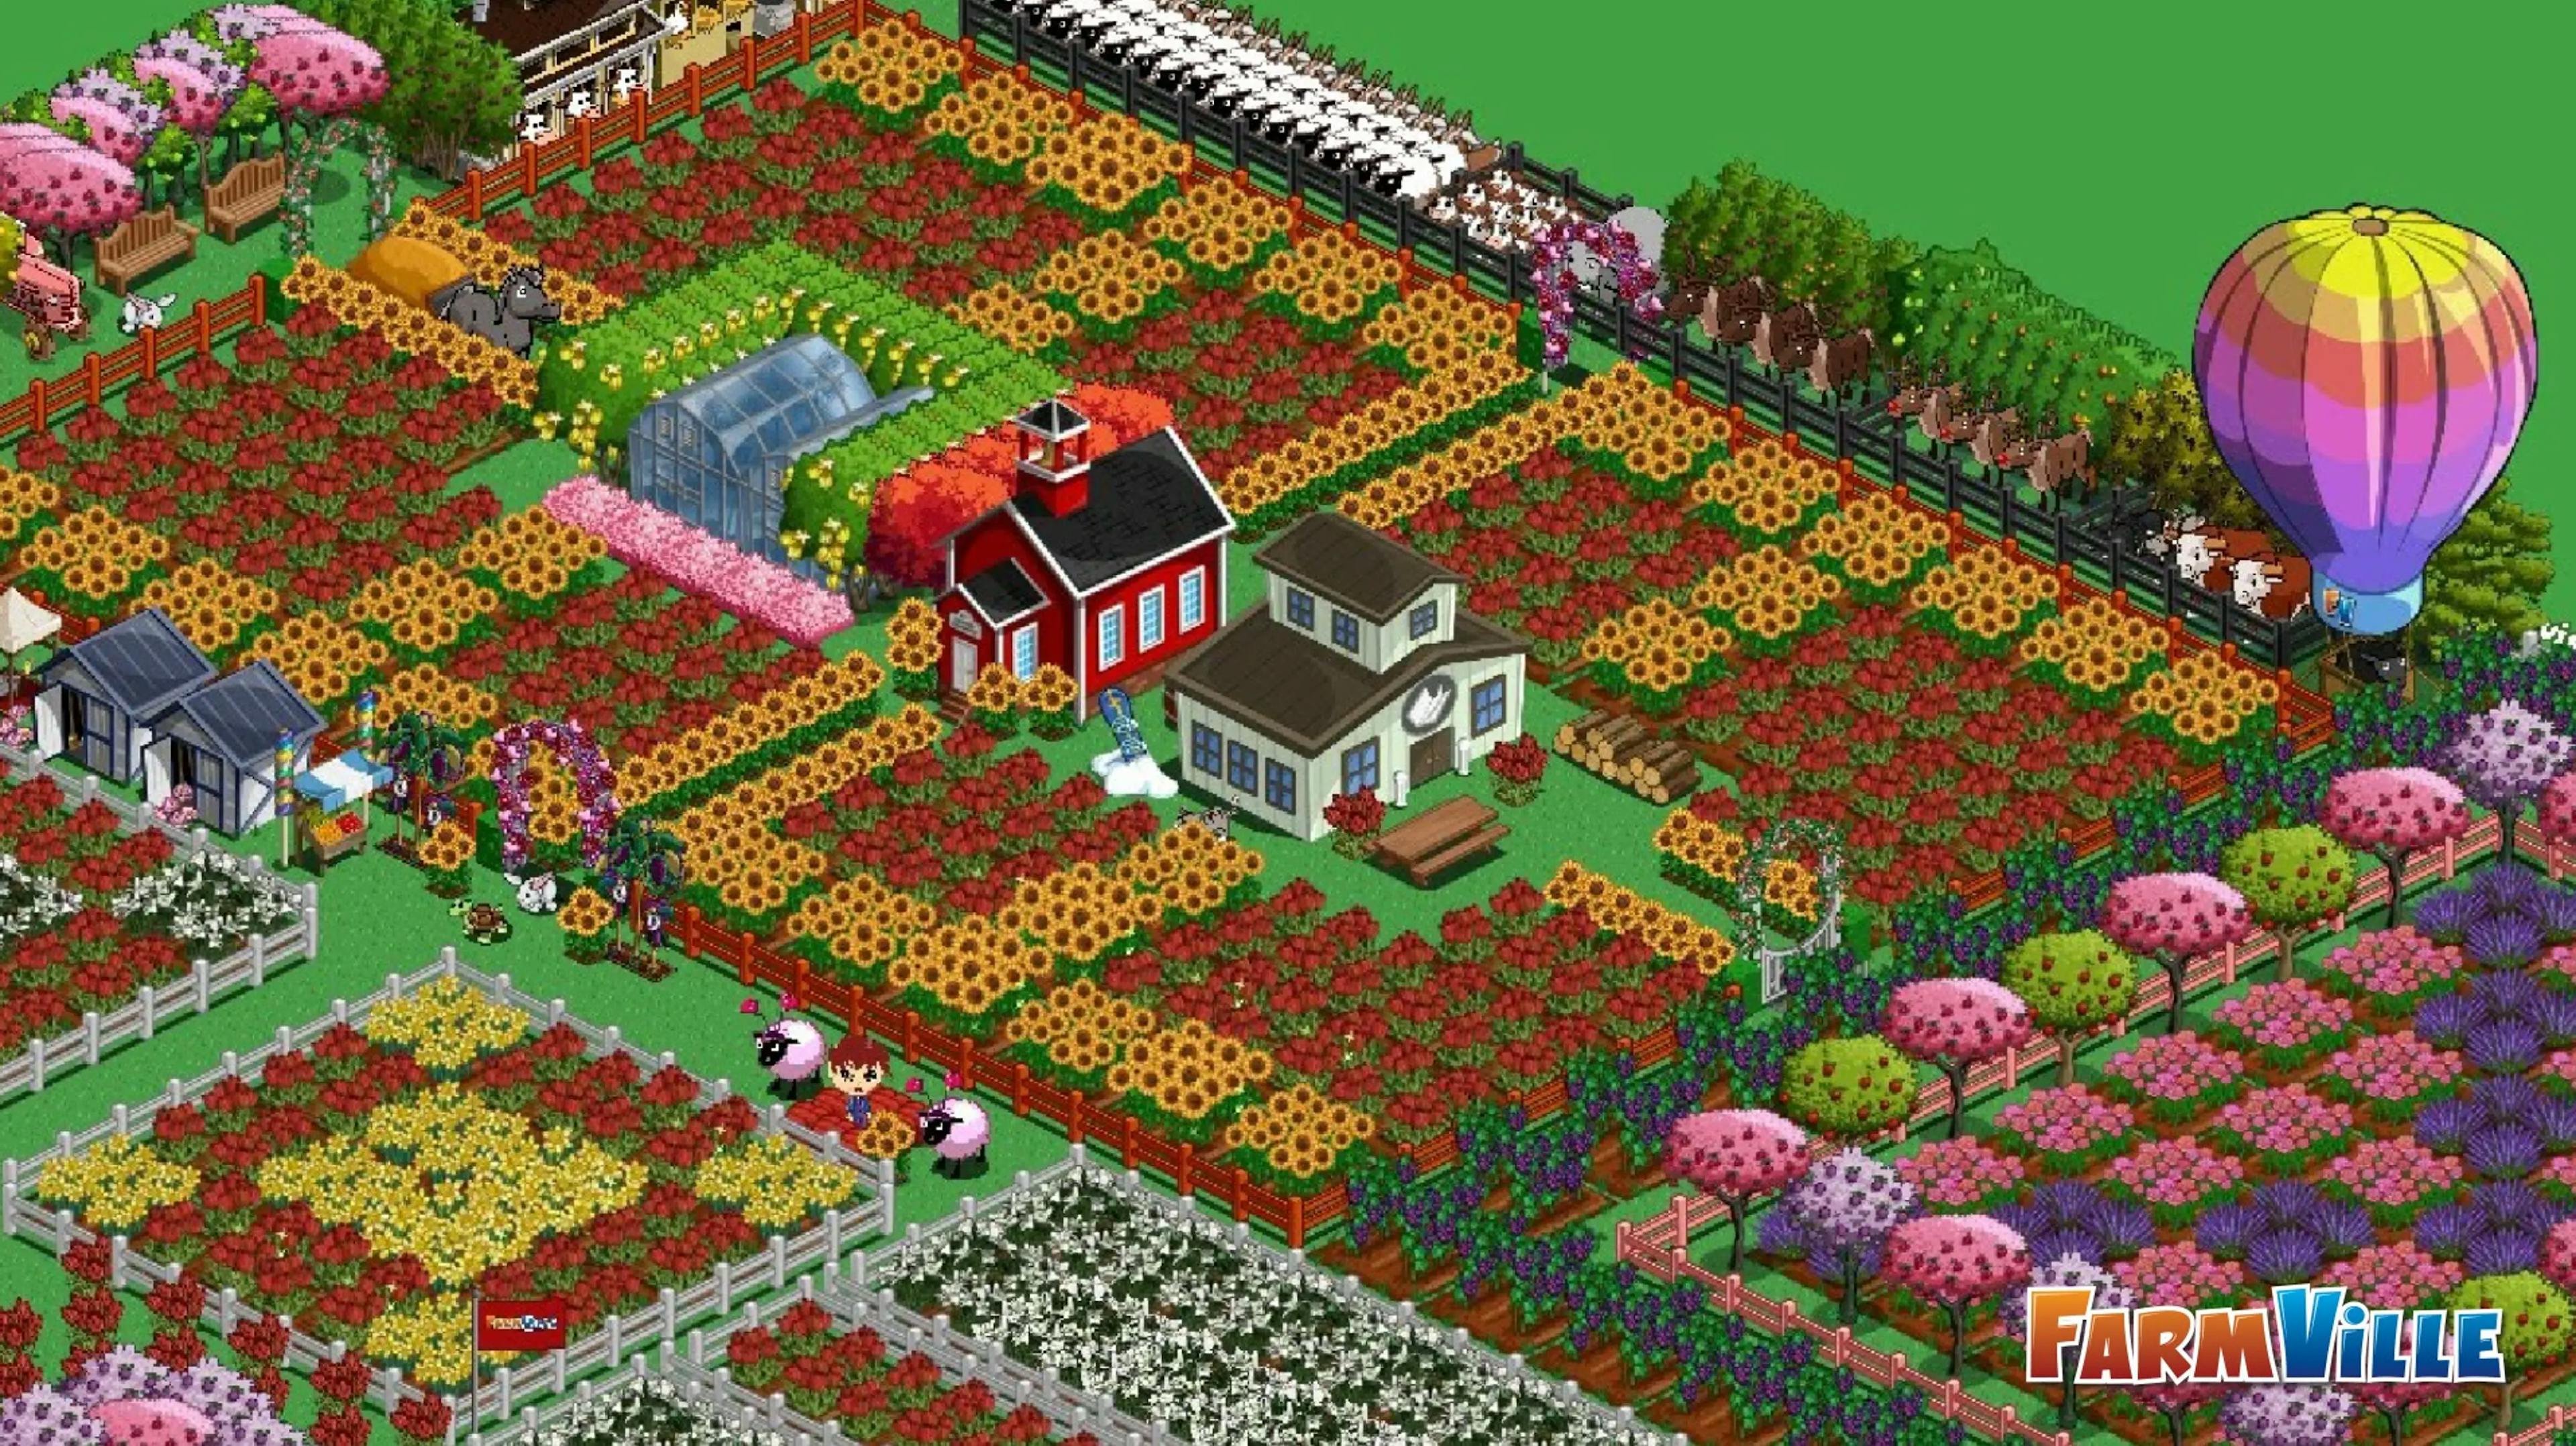 The original Farmville died little over a year ago. No tears shed here. Source: ReviewGeek